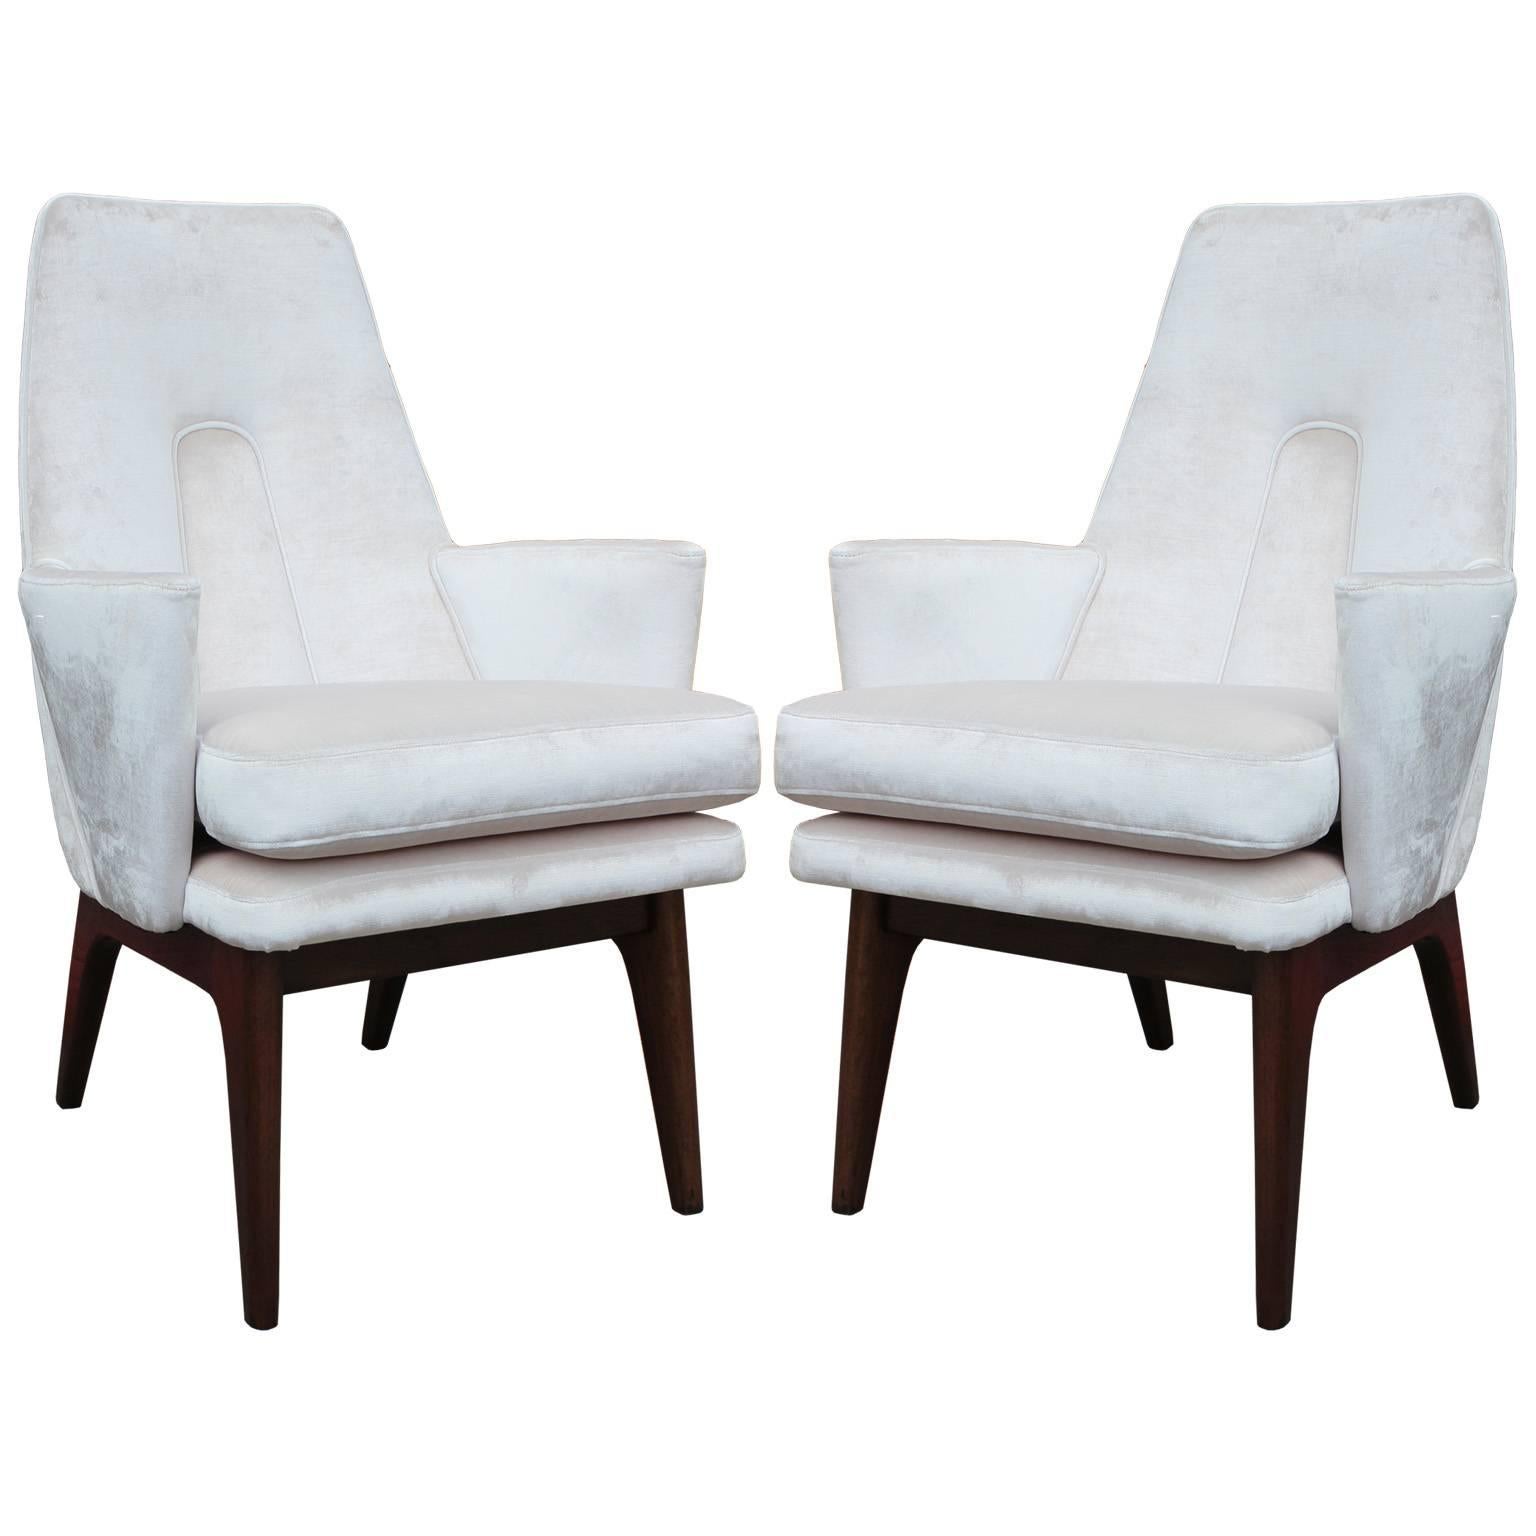 Pair of Adrian Pearsall Modern High Back Lounge Chairs in Pale Pink Velvet